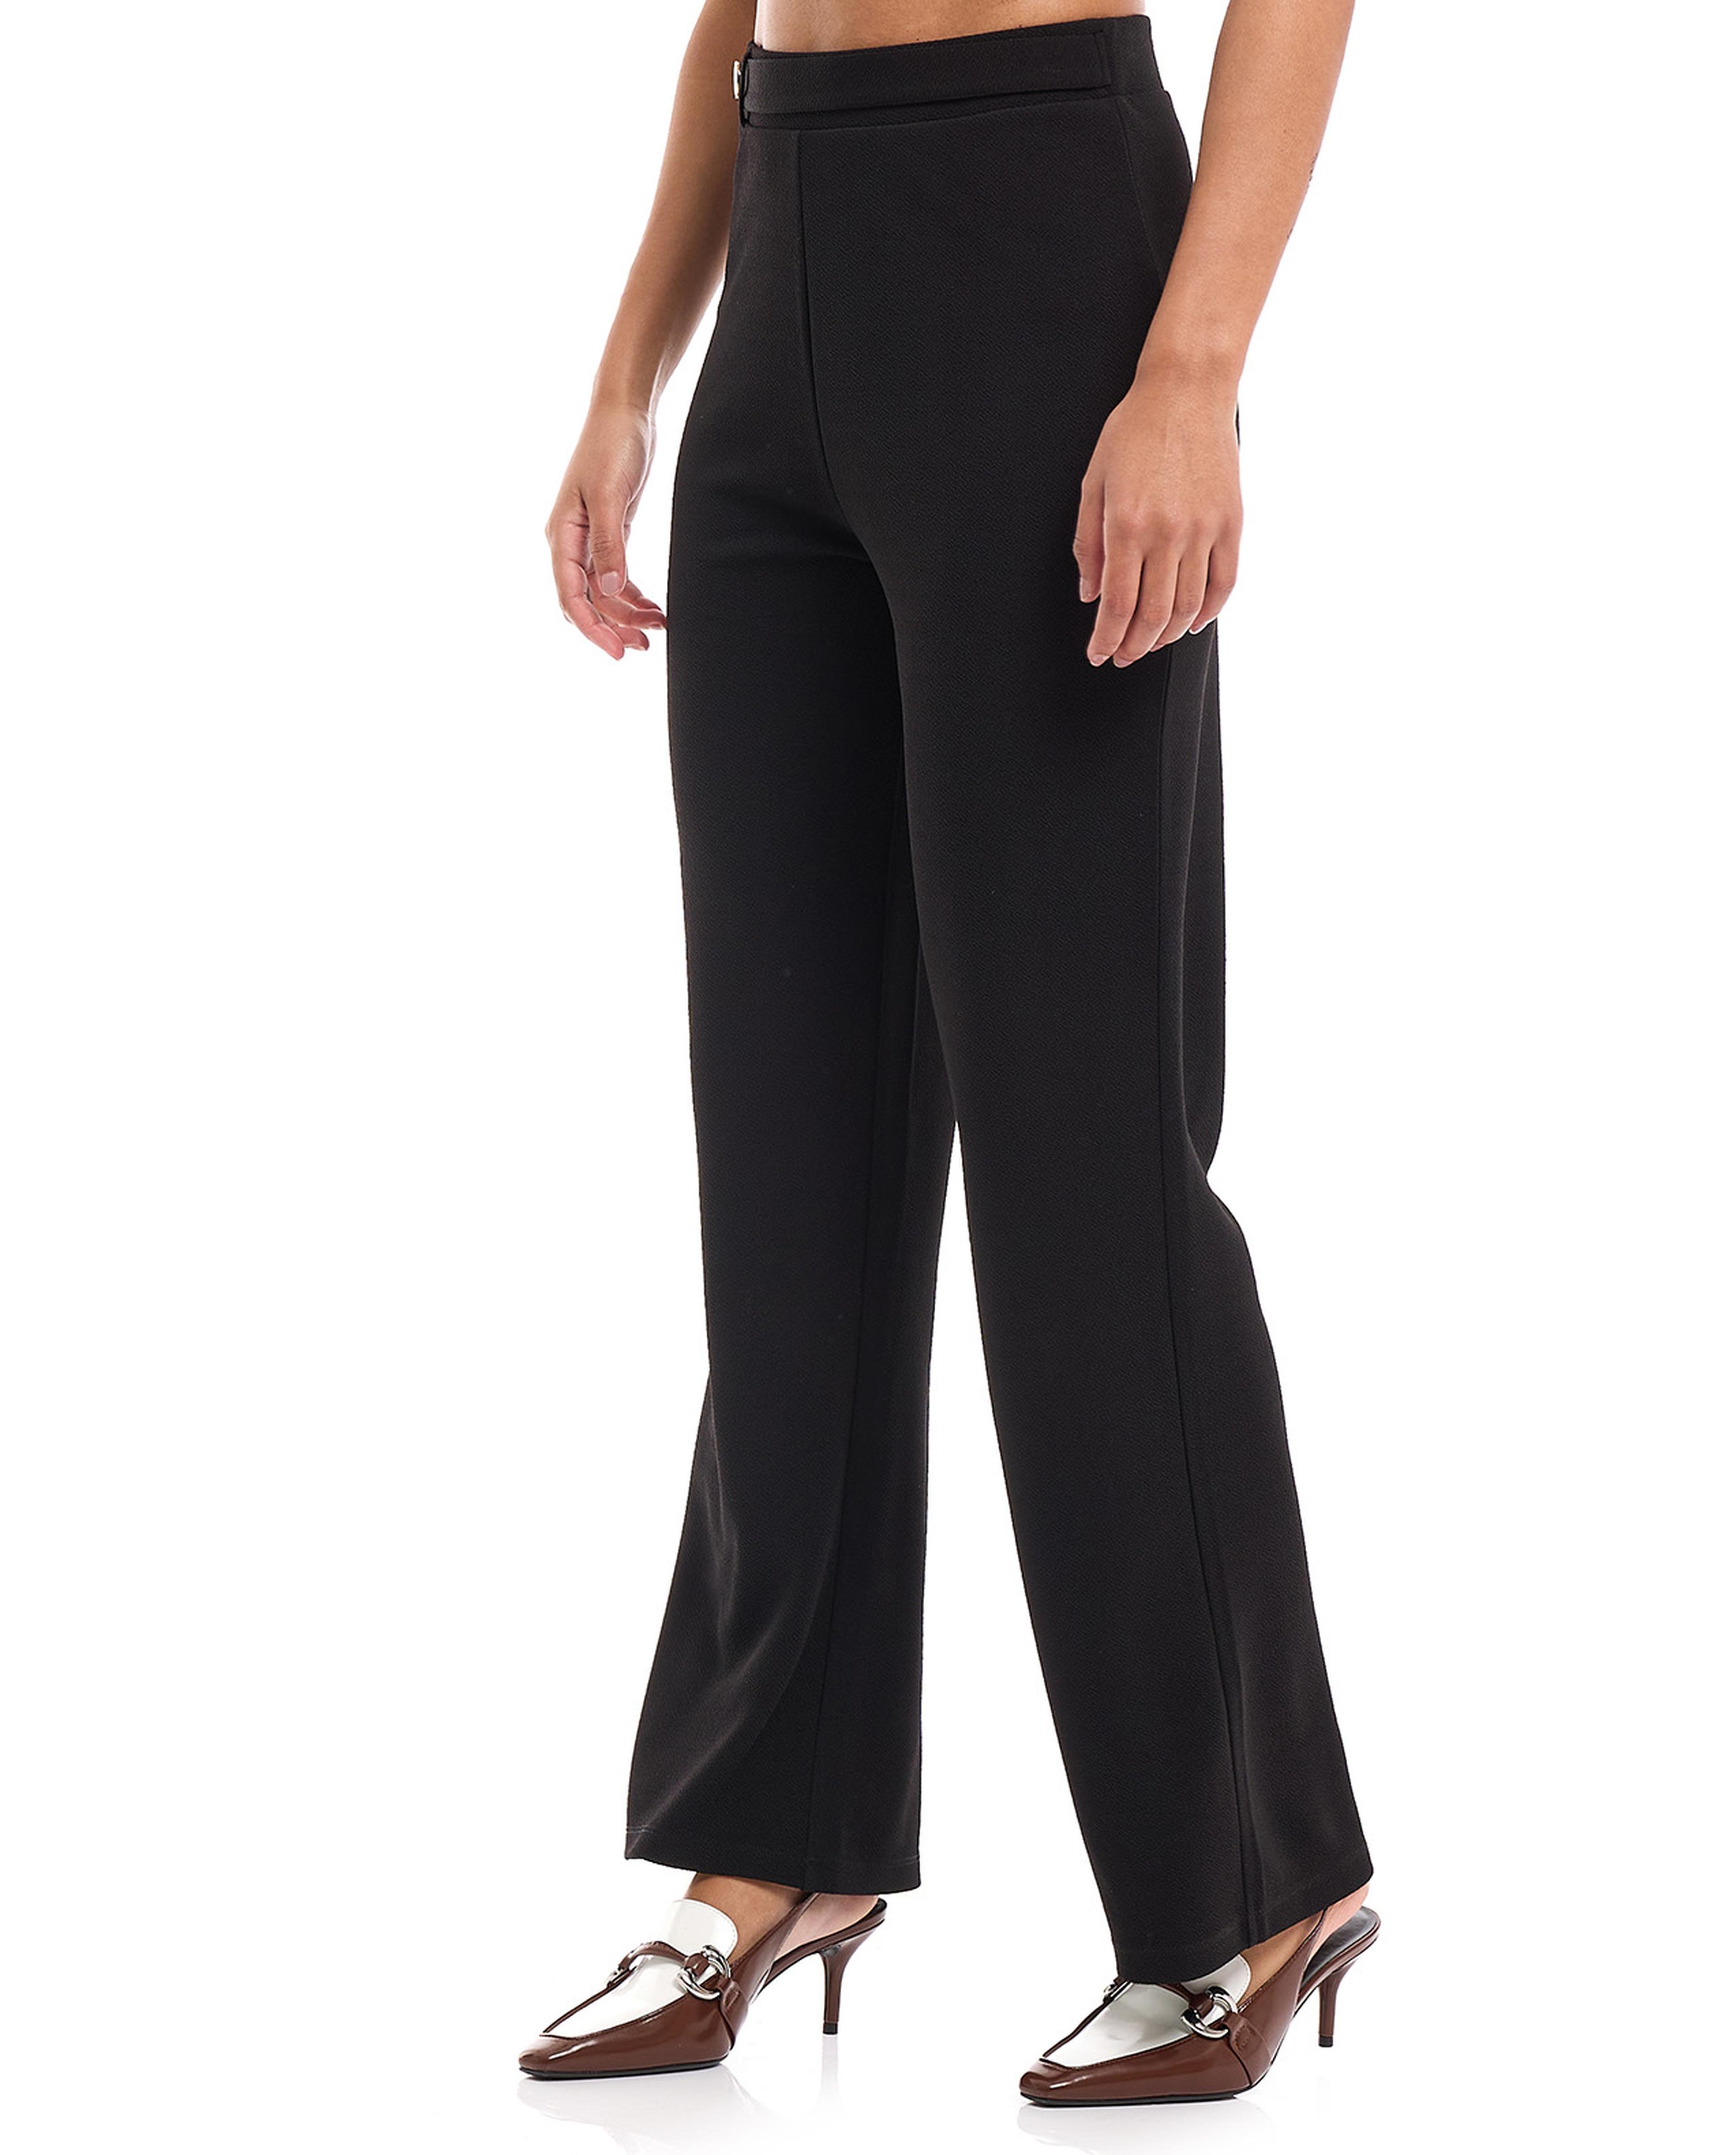 Textured Pants with Elastic Waist